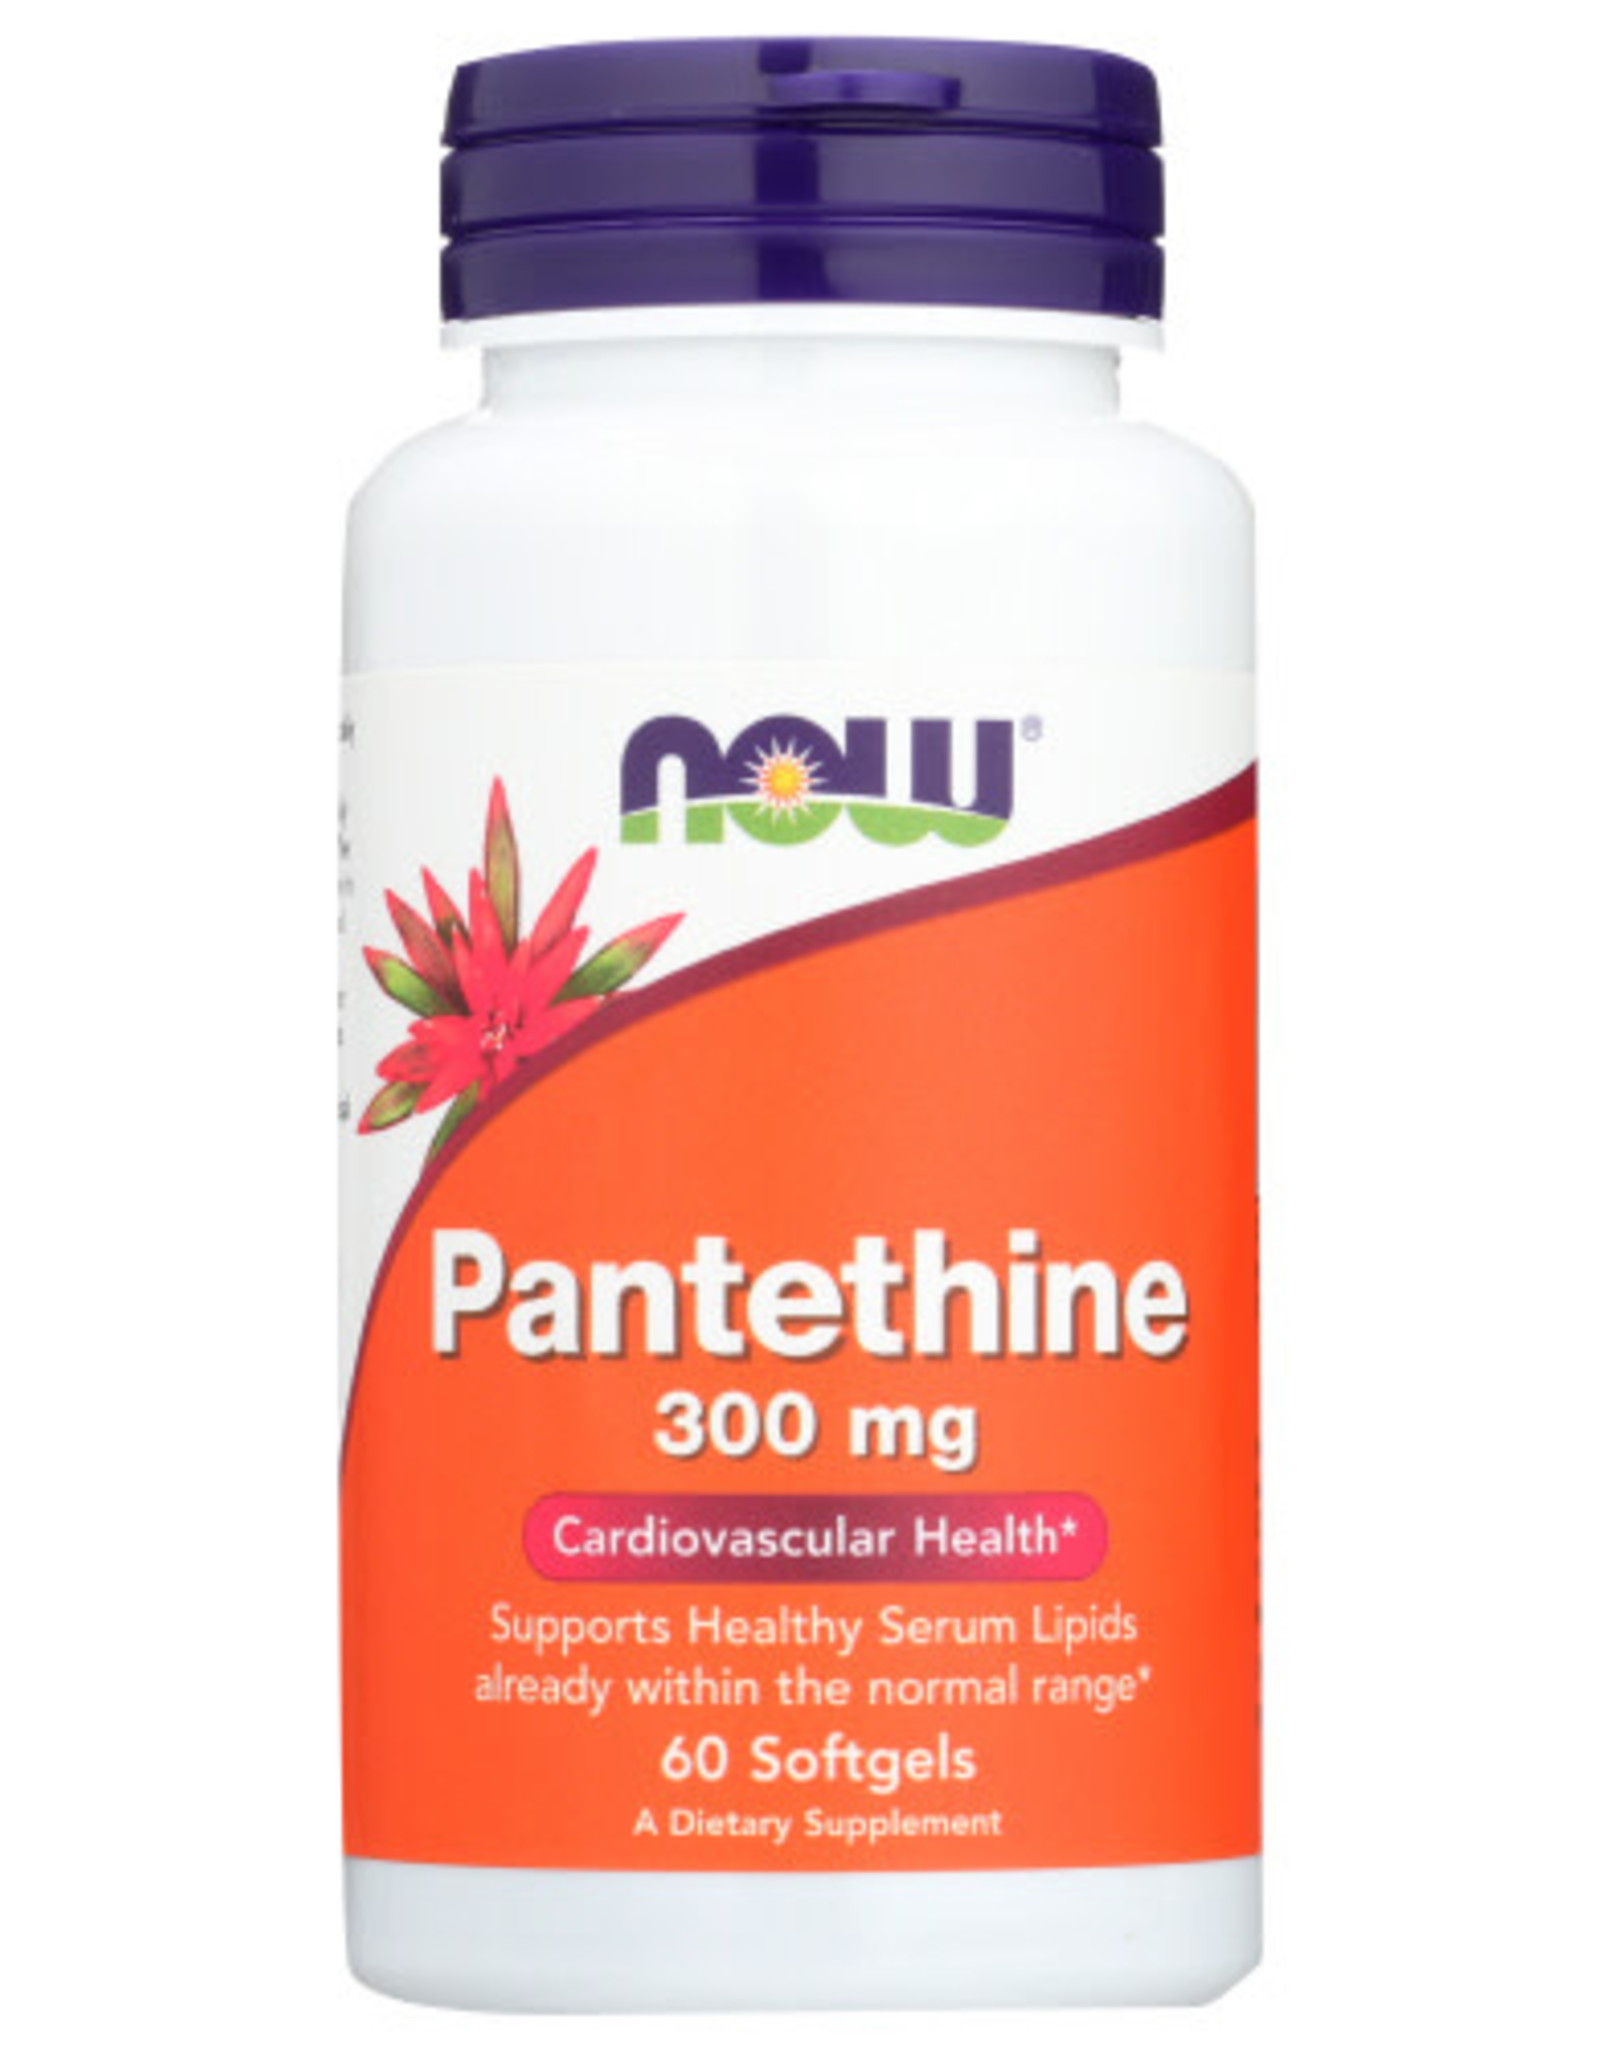 NOW FOODS X Now Pantethine 300mg Cardiovascular Health 60 Softgels